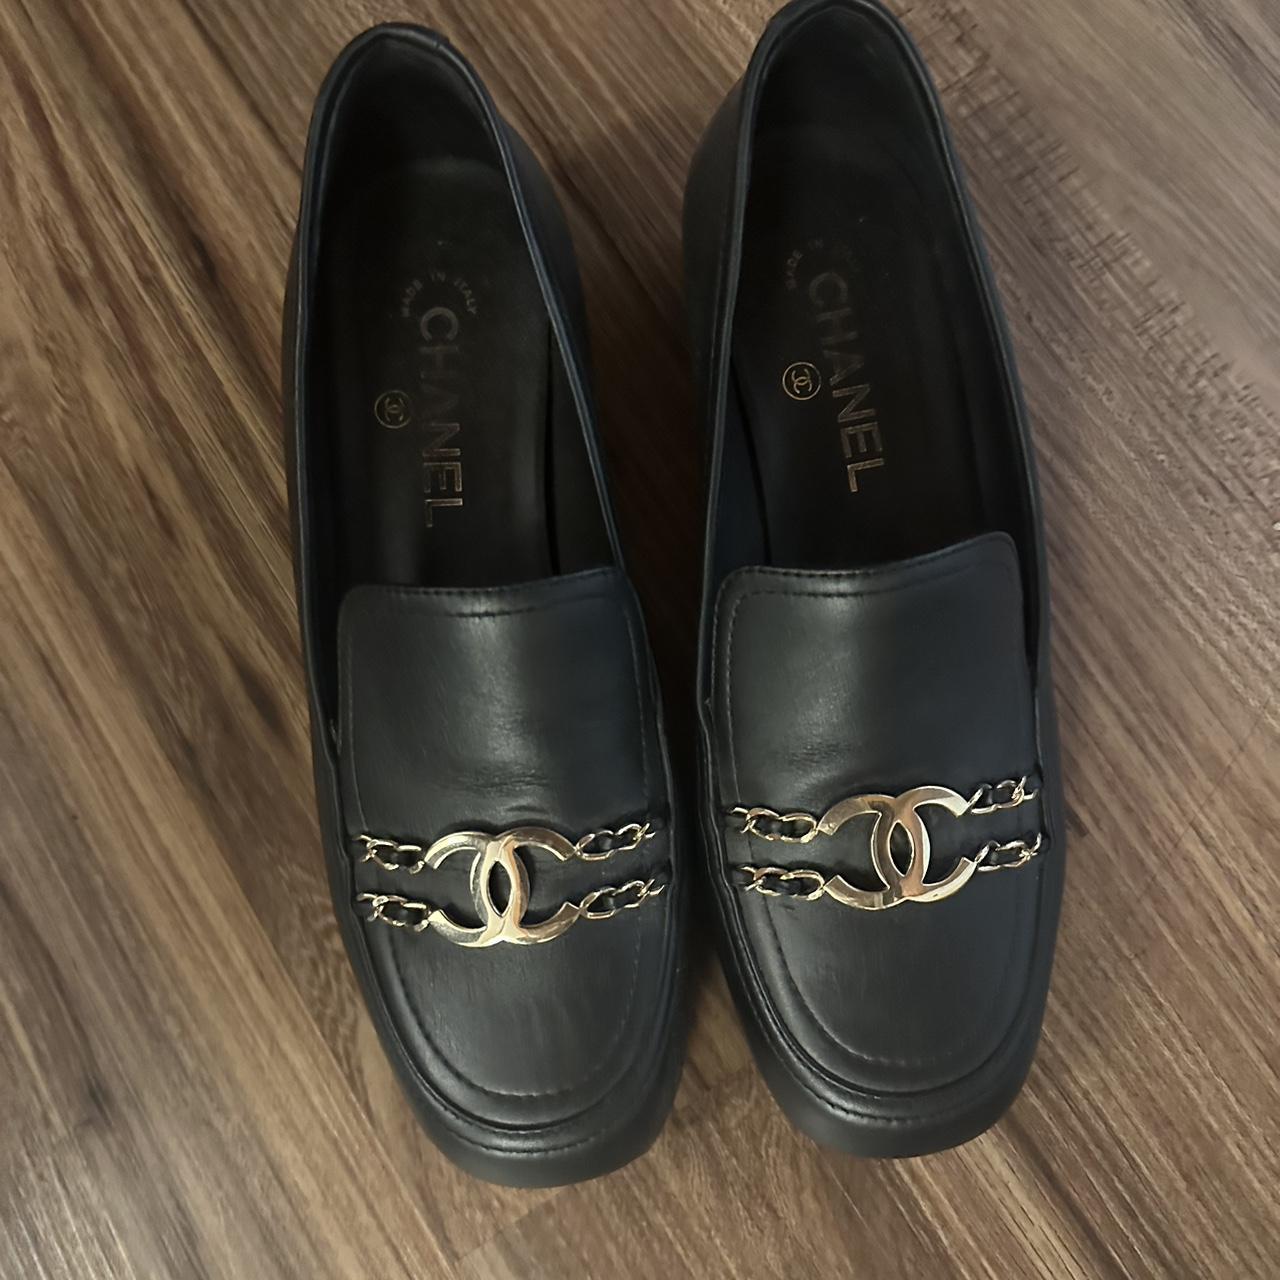 Chanel loafers size 39 1/2. Good condition and comes